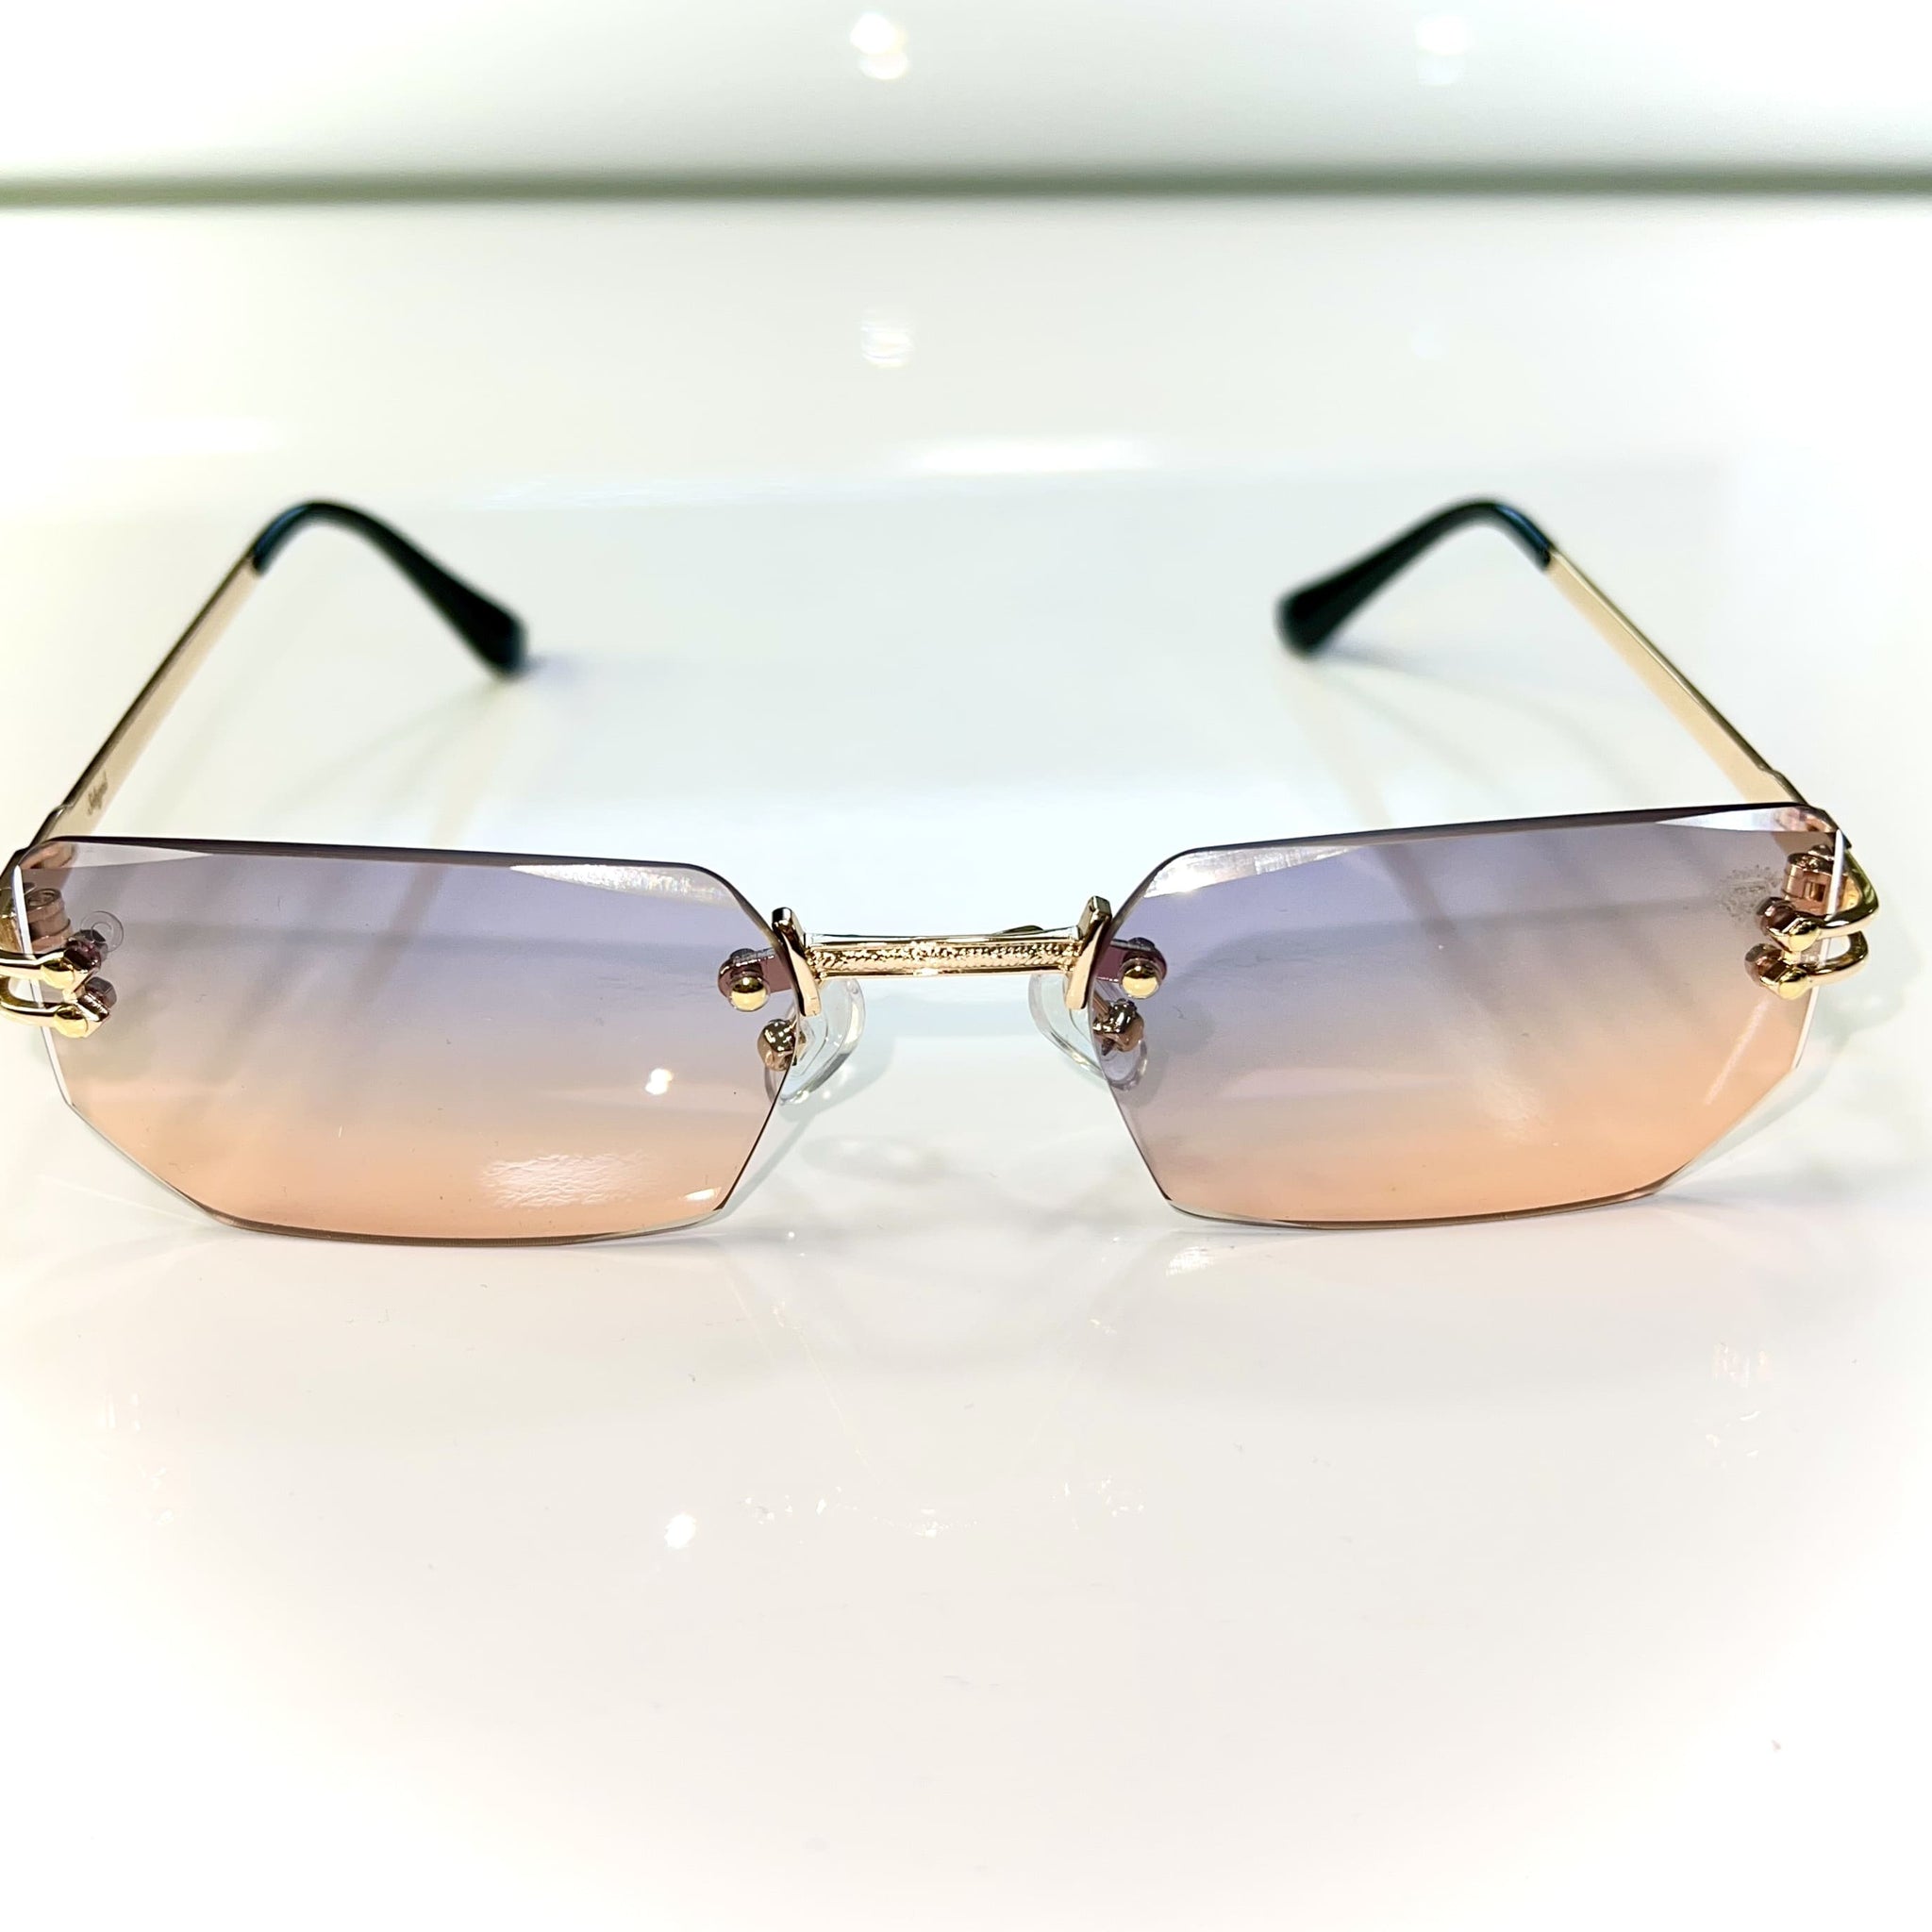 Rich Glasses - 14k gold plated - Diamond Cut - Light Brown / Blue Shade - Sehgal Glasses